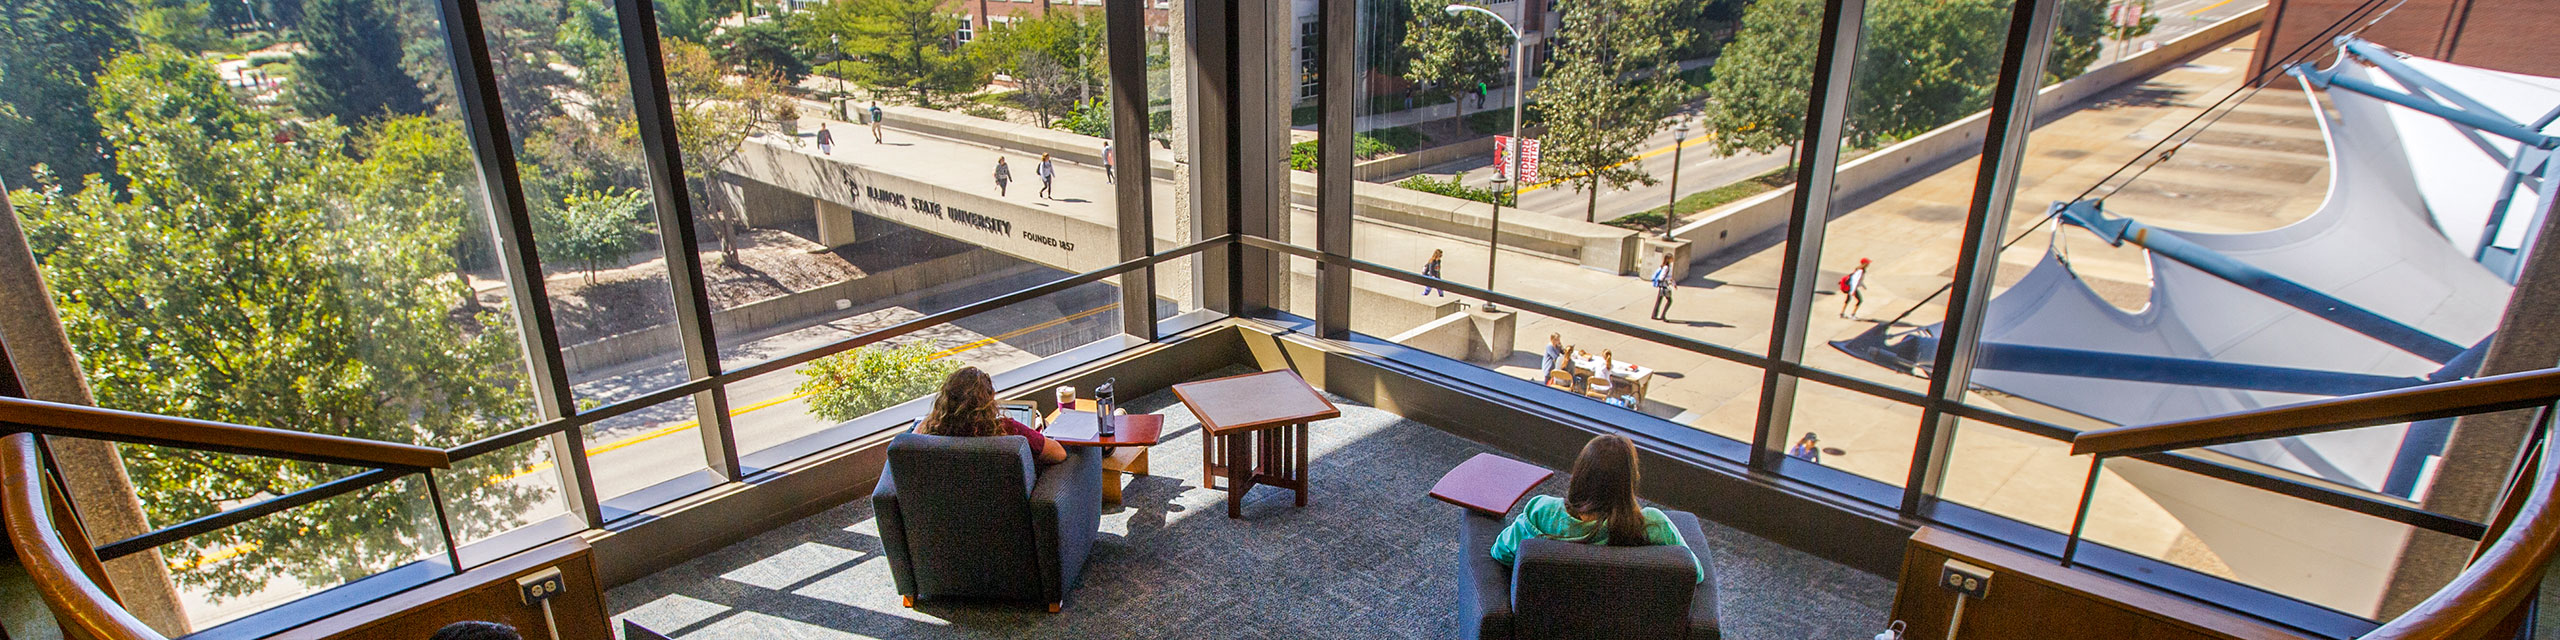 The view from the library captures ISU bridge with students in the background.